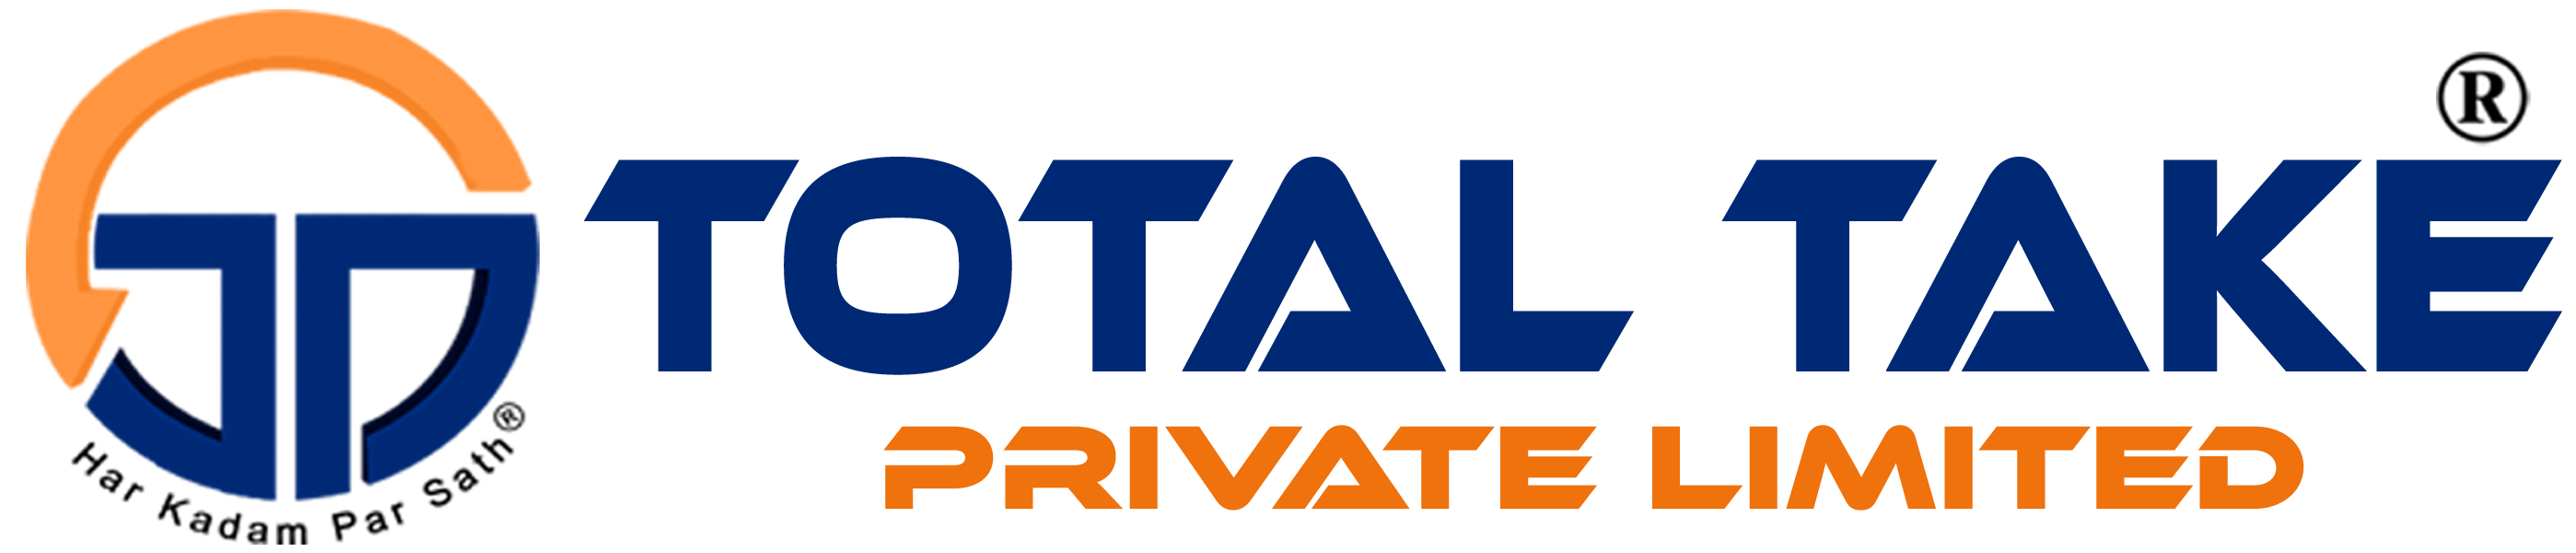 TOTAL TAKE PRIVATE LIMITED